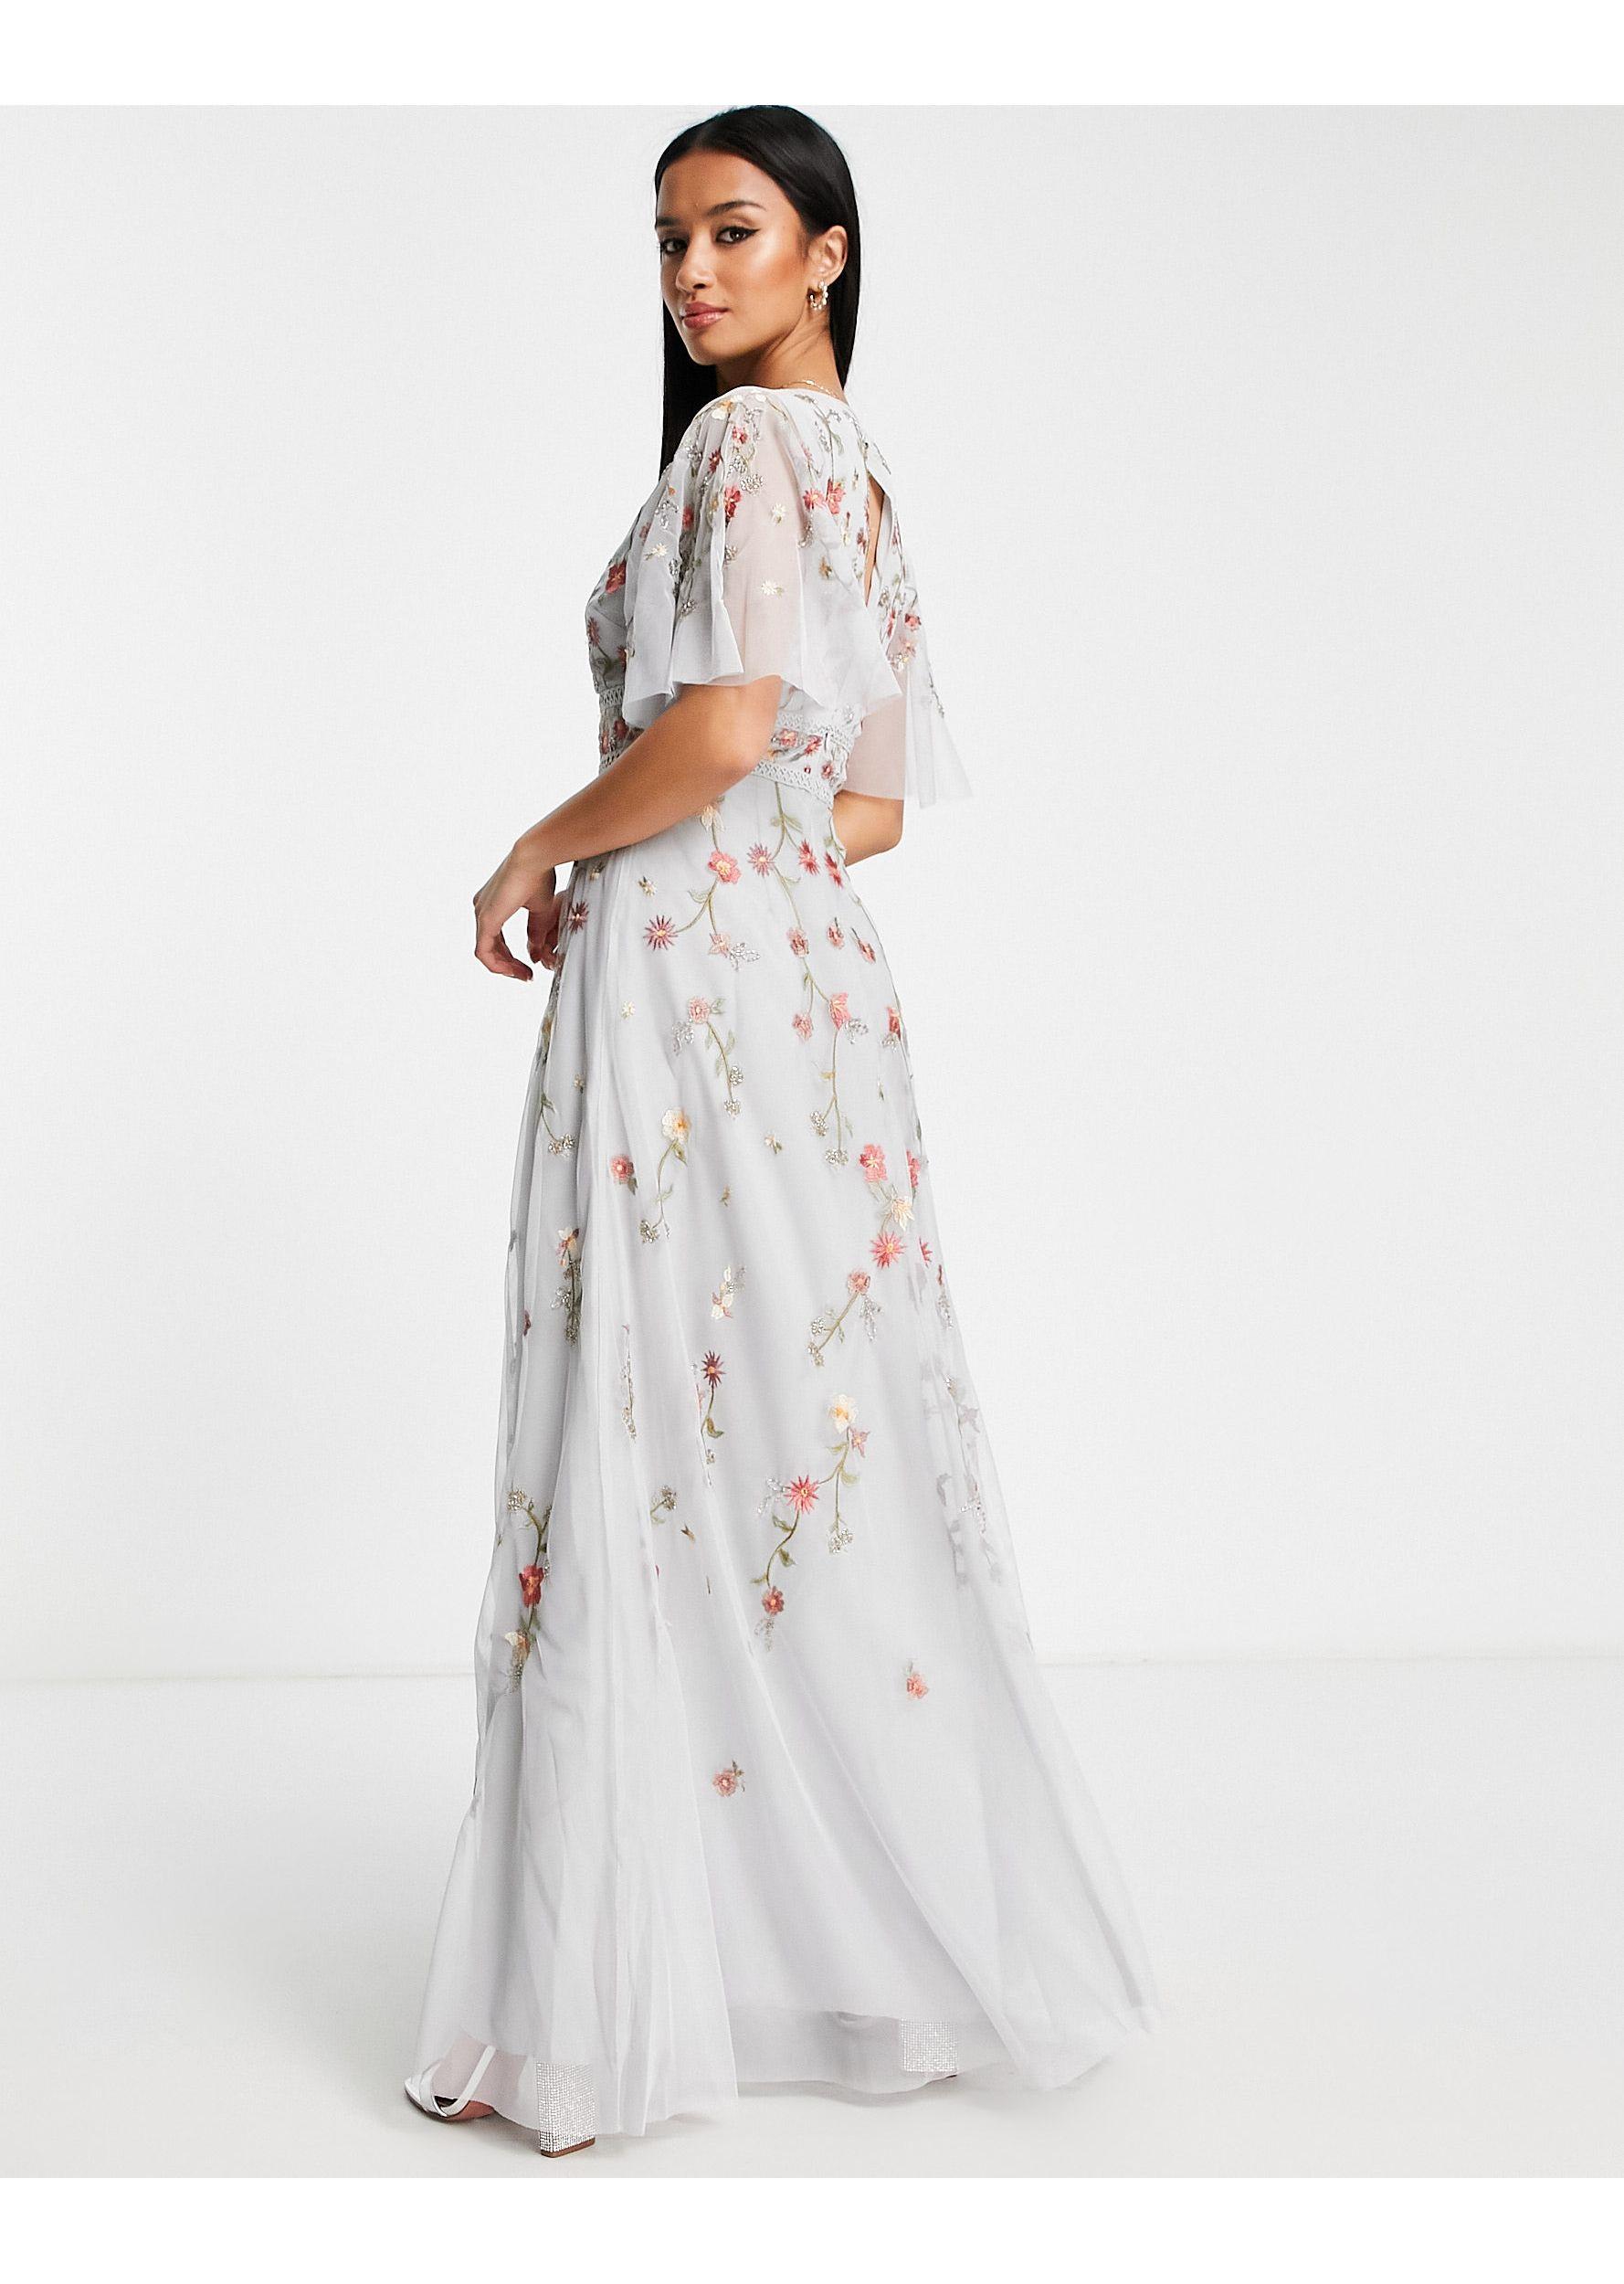 I can't believe you can get a dress like this on Asos! : r/Weddingsunder10k